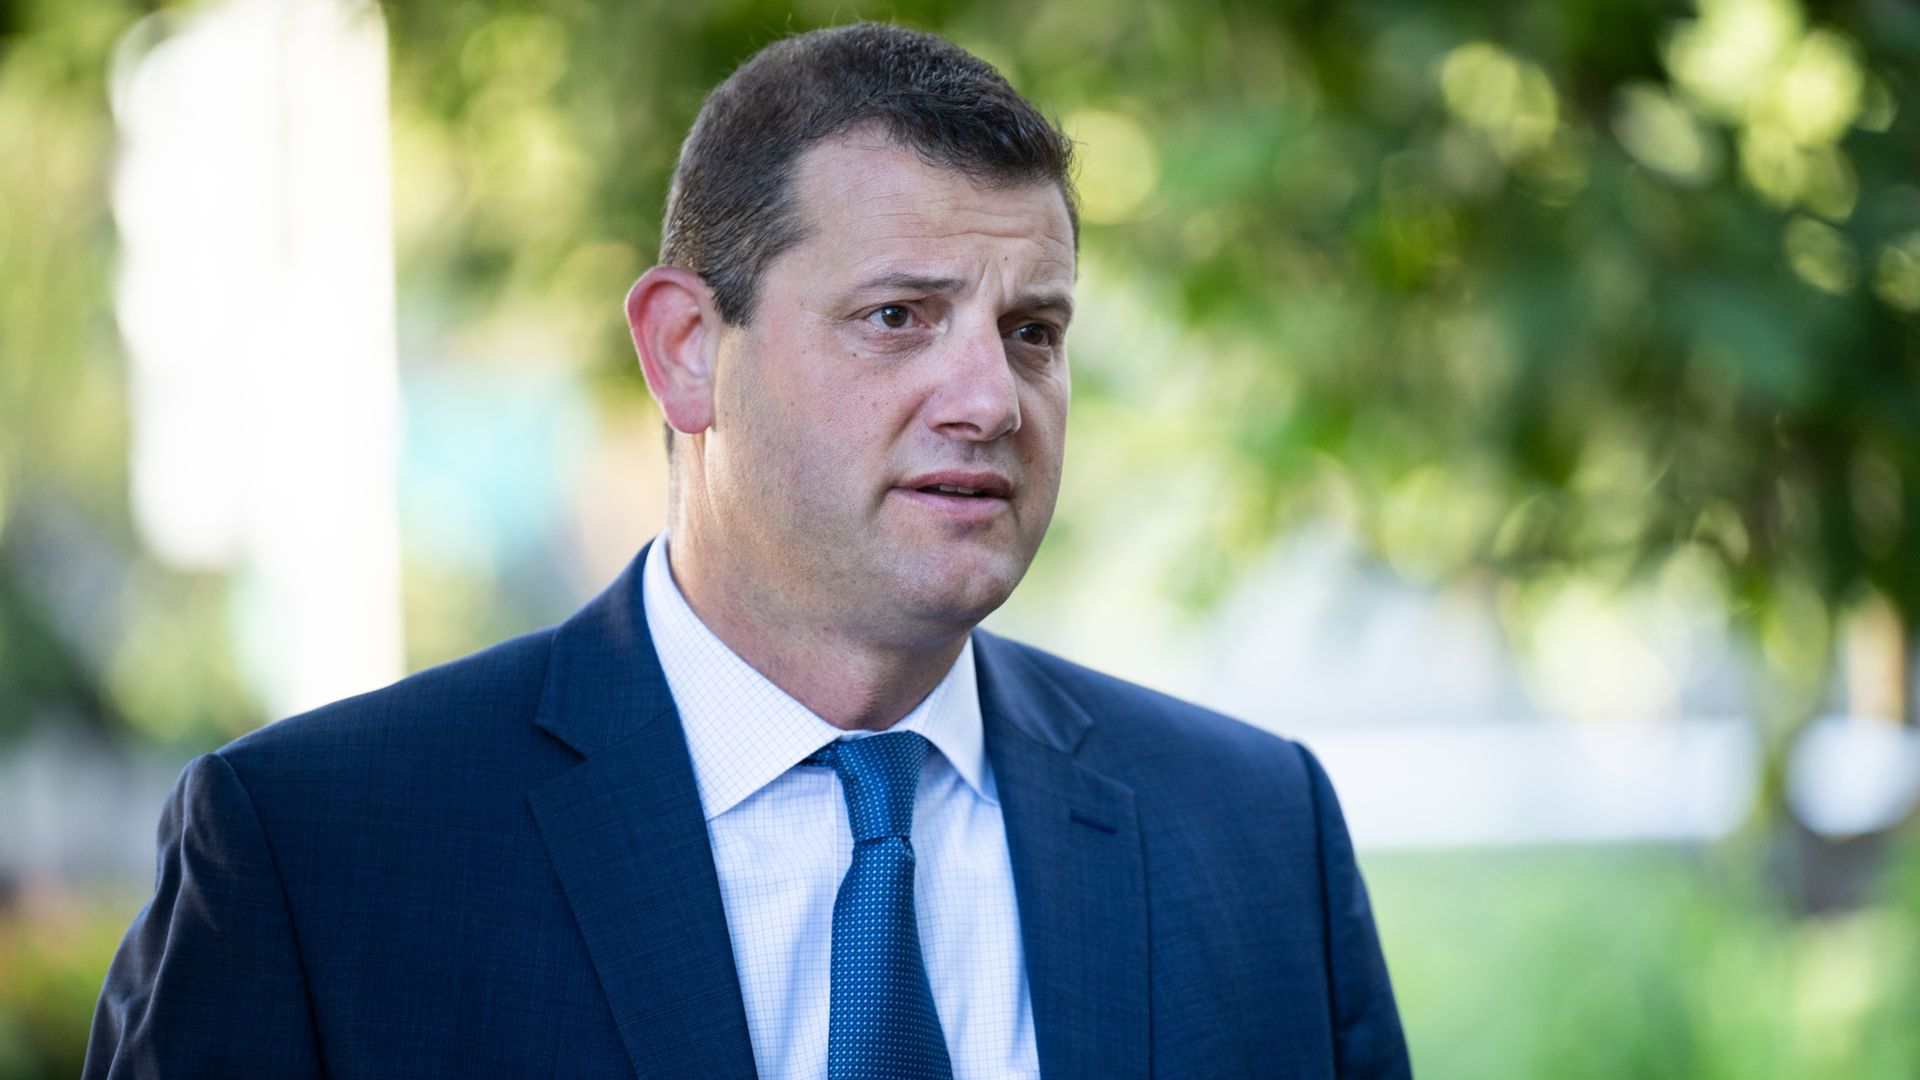 Rep. David Valadao, R-Calif., arrives for the House GOP caucus meeting at the Capitol Hill Club in Washington on Tuesday, Sept. 20.